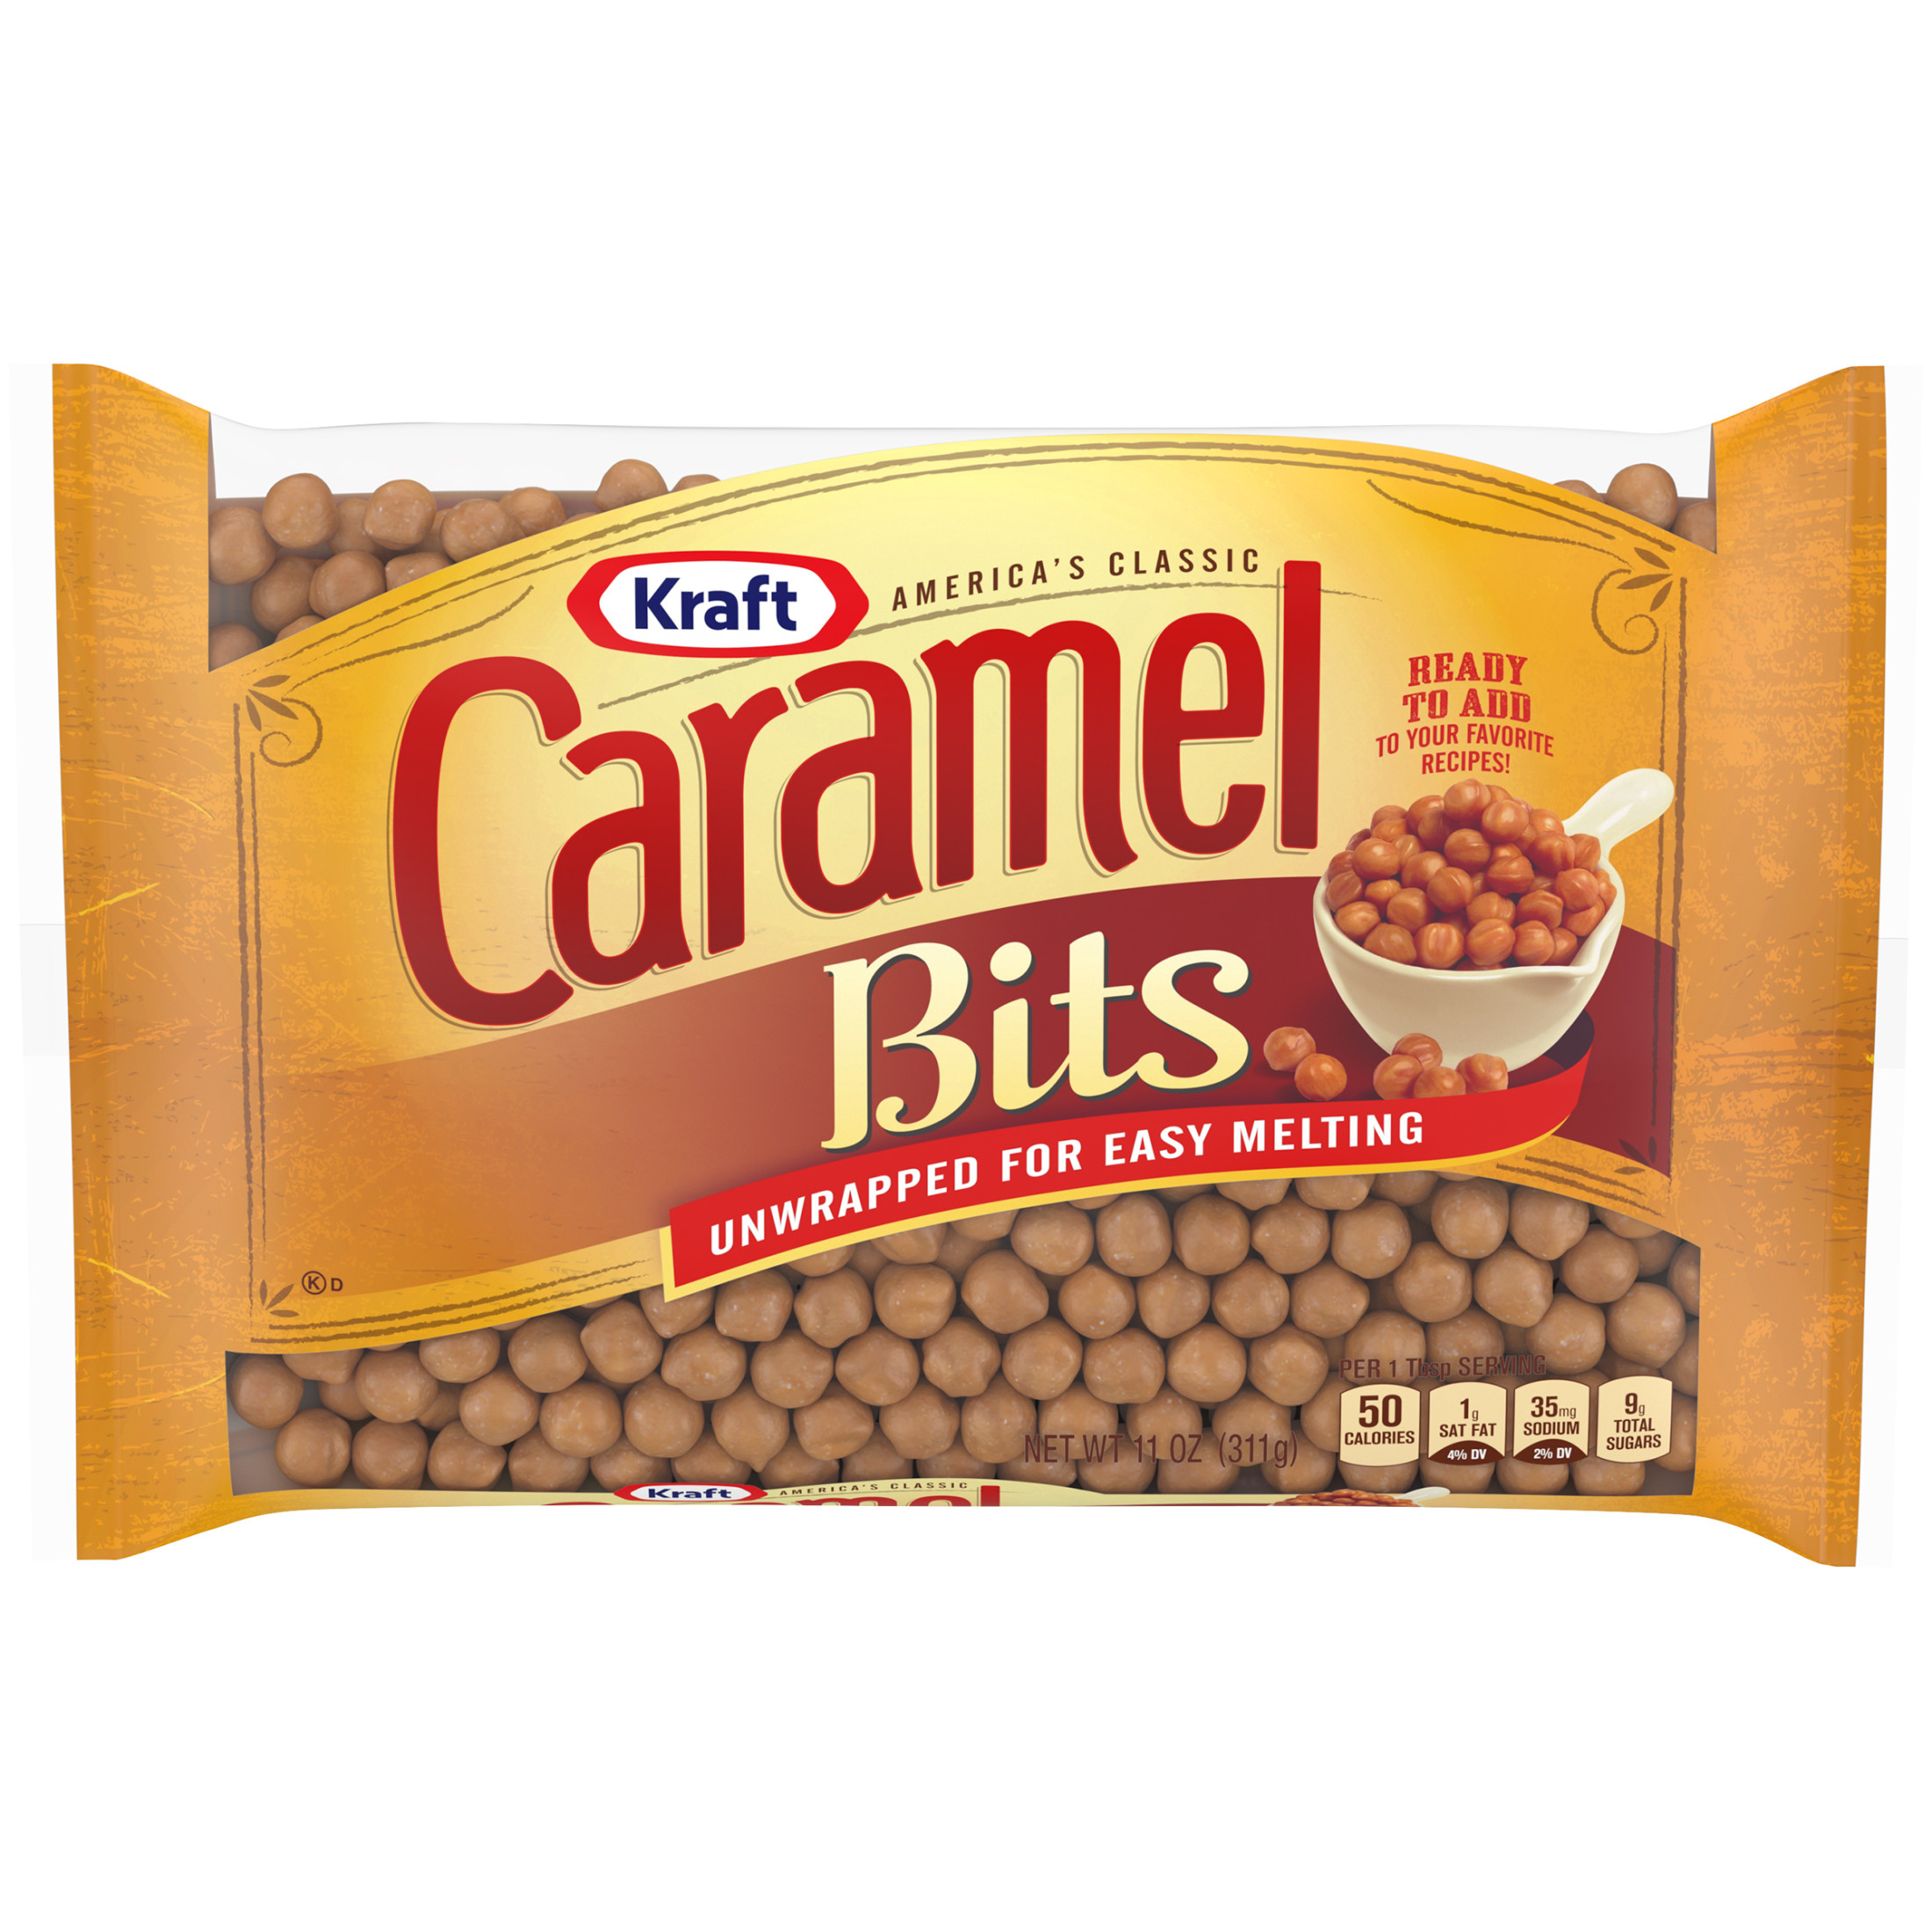 Kraft America's Classic Unwrapped Candy Caramel Bits for Easy Melting, 11 oz Bag - image 1 of 7